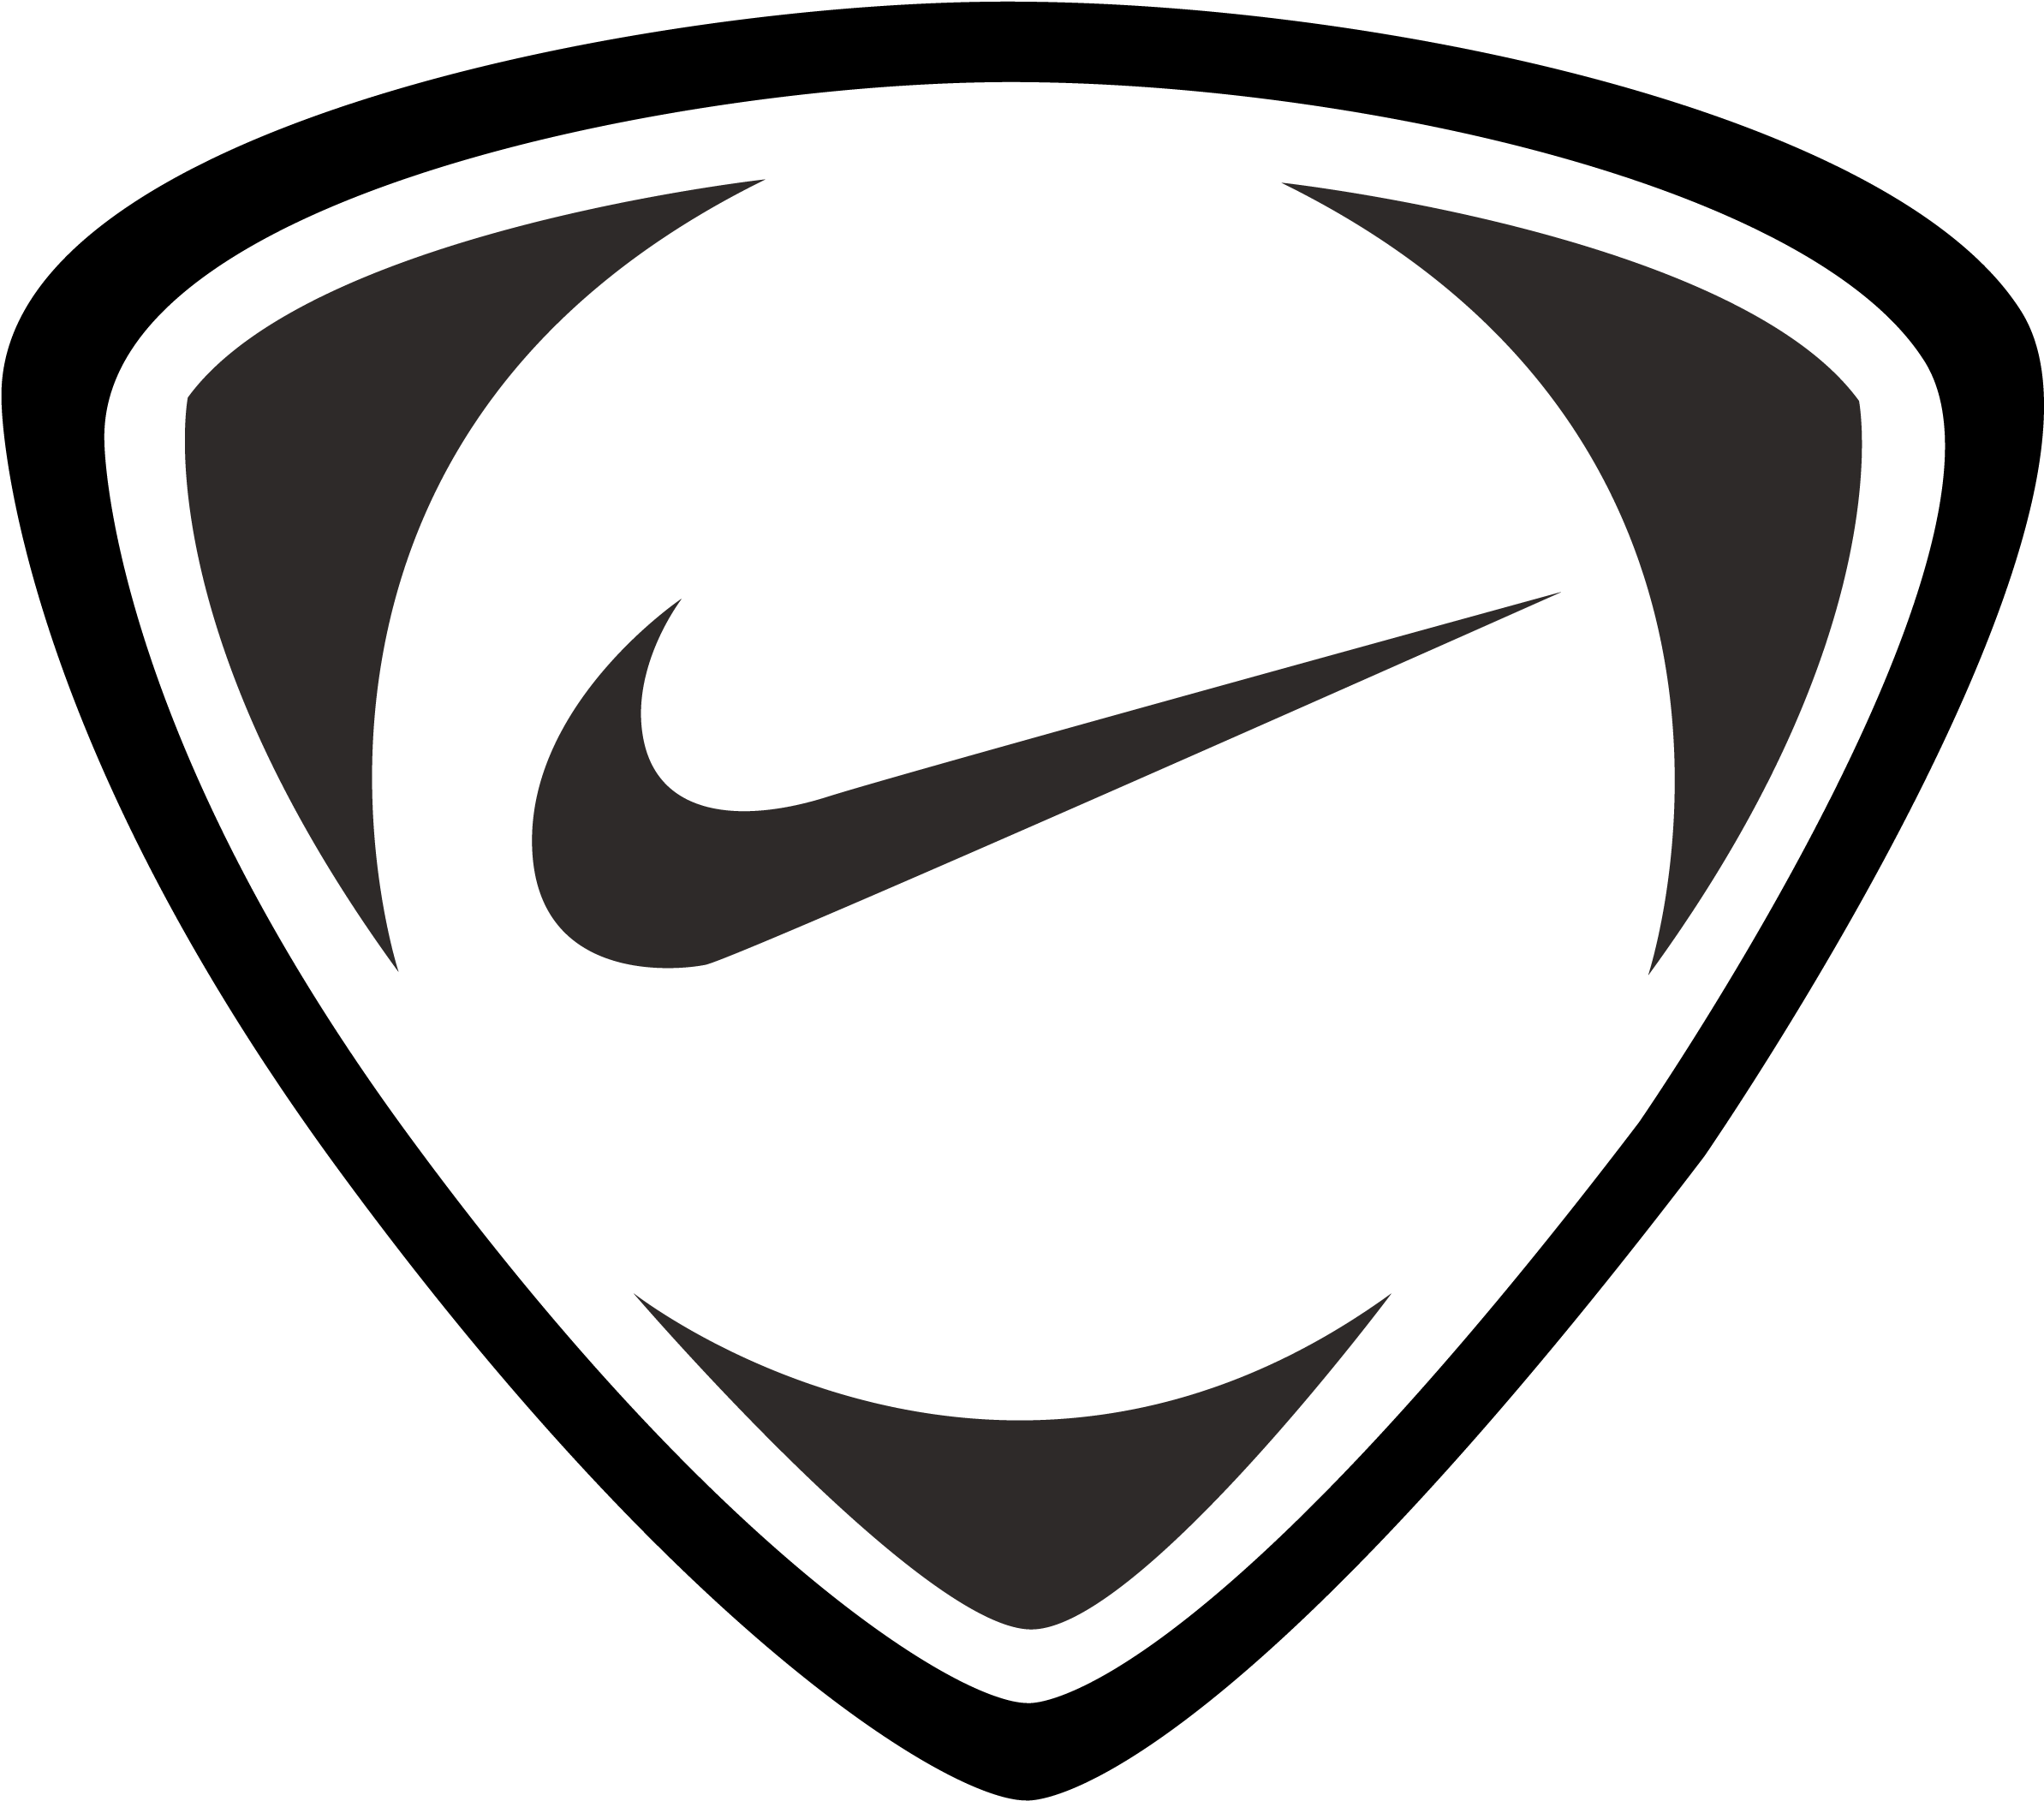 Nike Swoosh Vector at Vectorified.com | Collection of Nike Swoosh ...